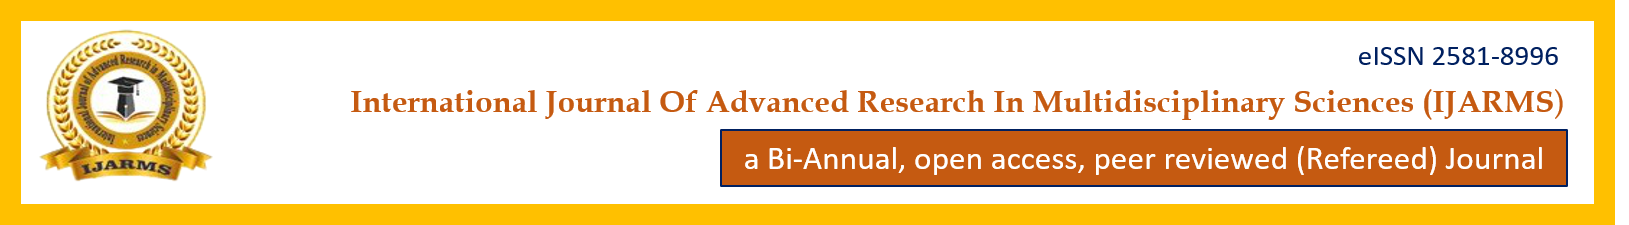 International Journal Of Advanced Research In Multidisciplinary Sciences